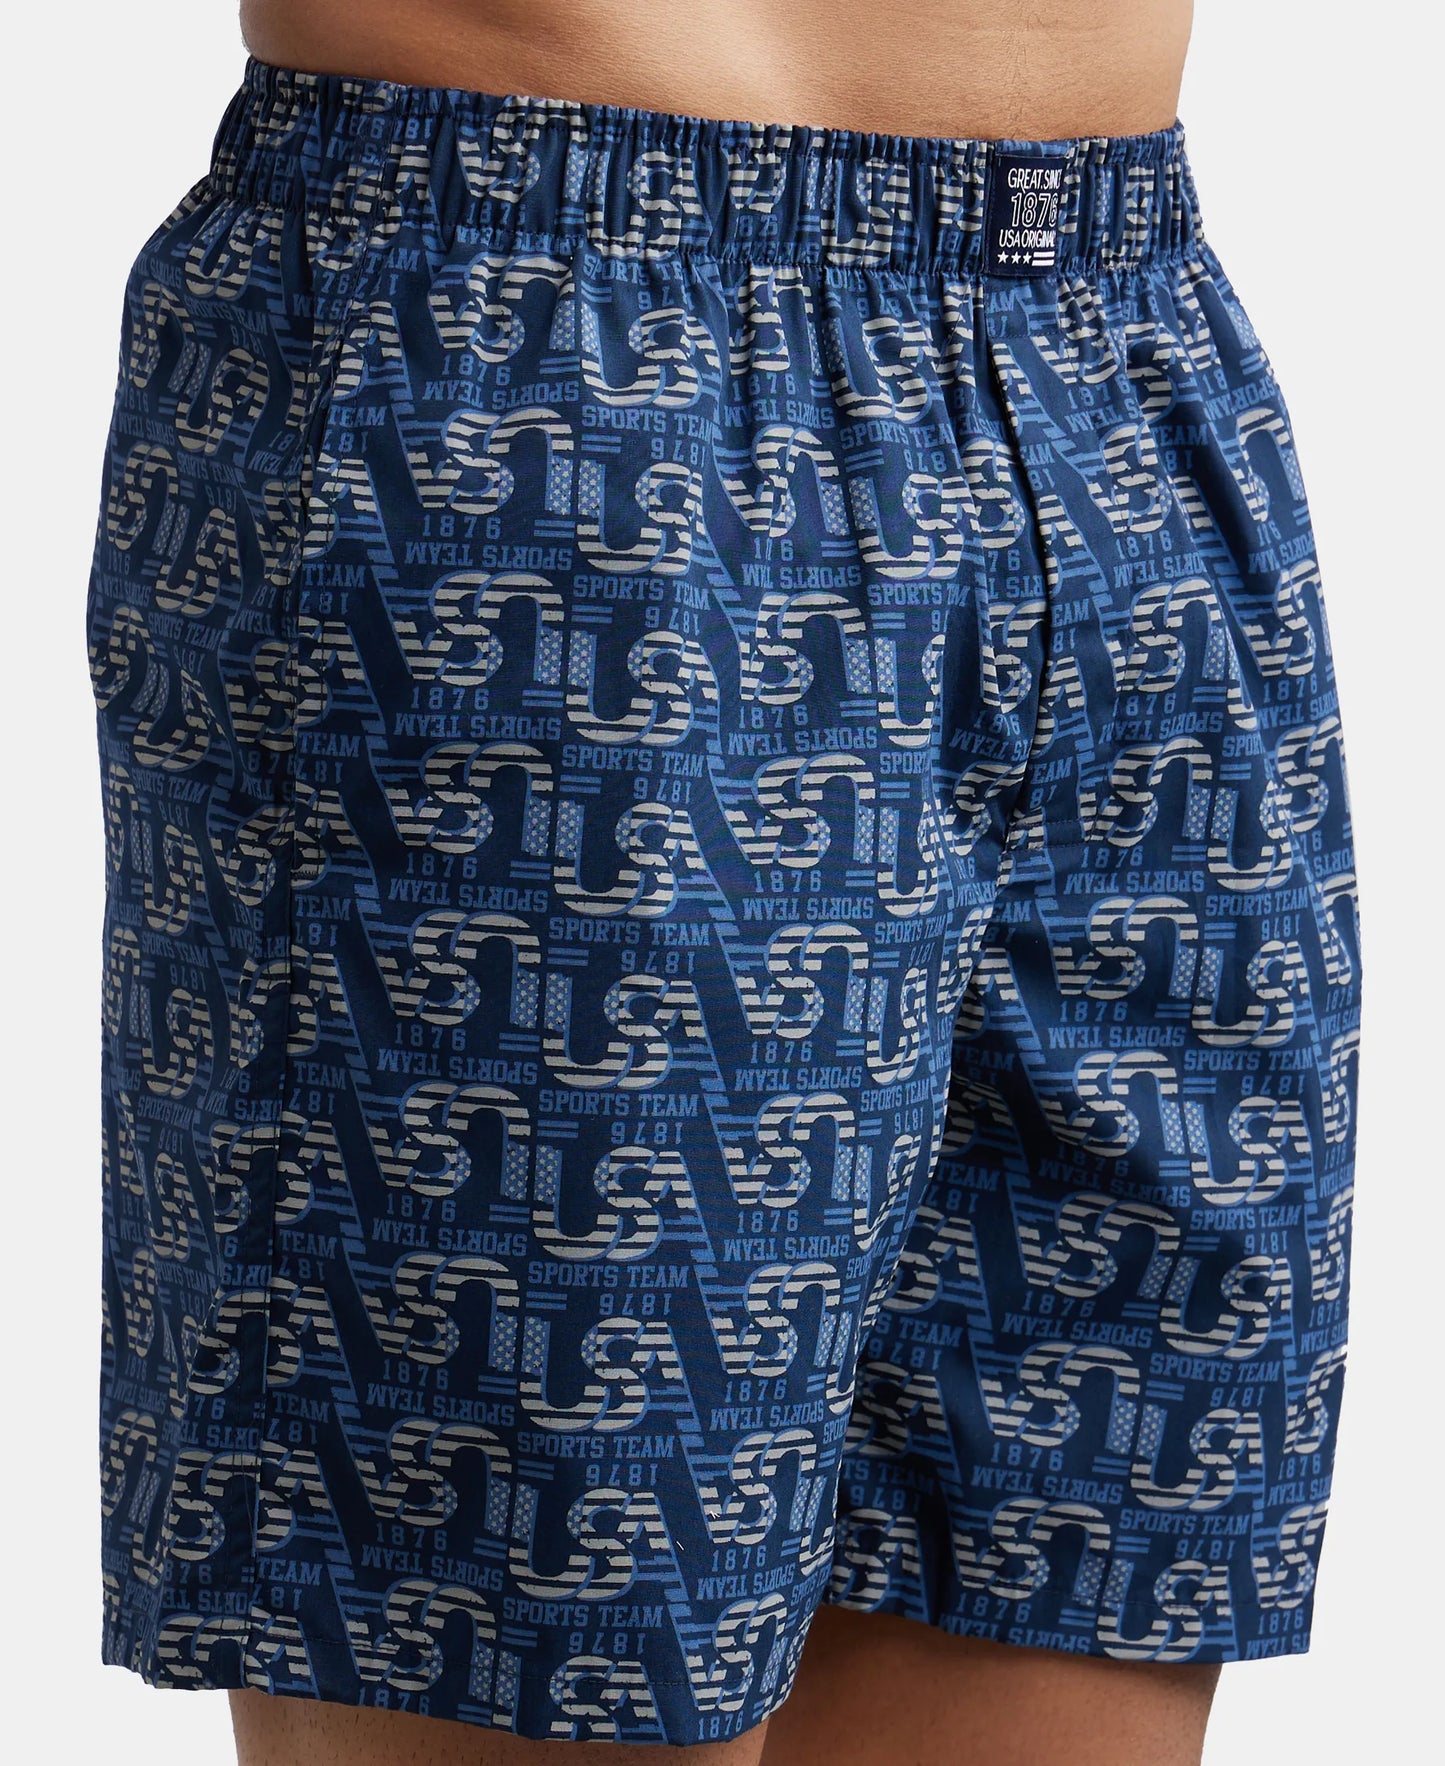 Super Combed Mercerized Cotton Woven Printed Boxer Shorts with Side Pocket - Navy-7